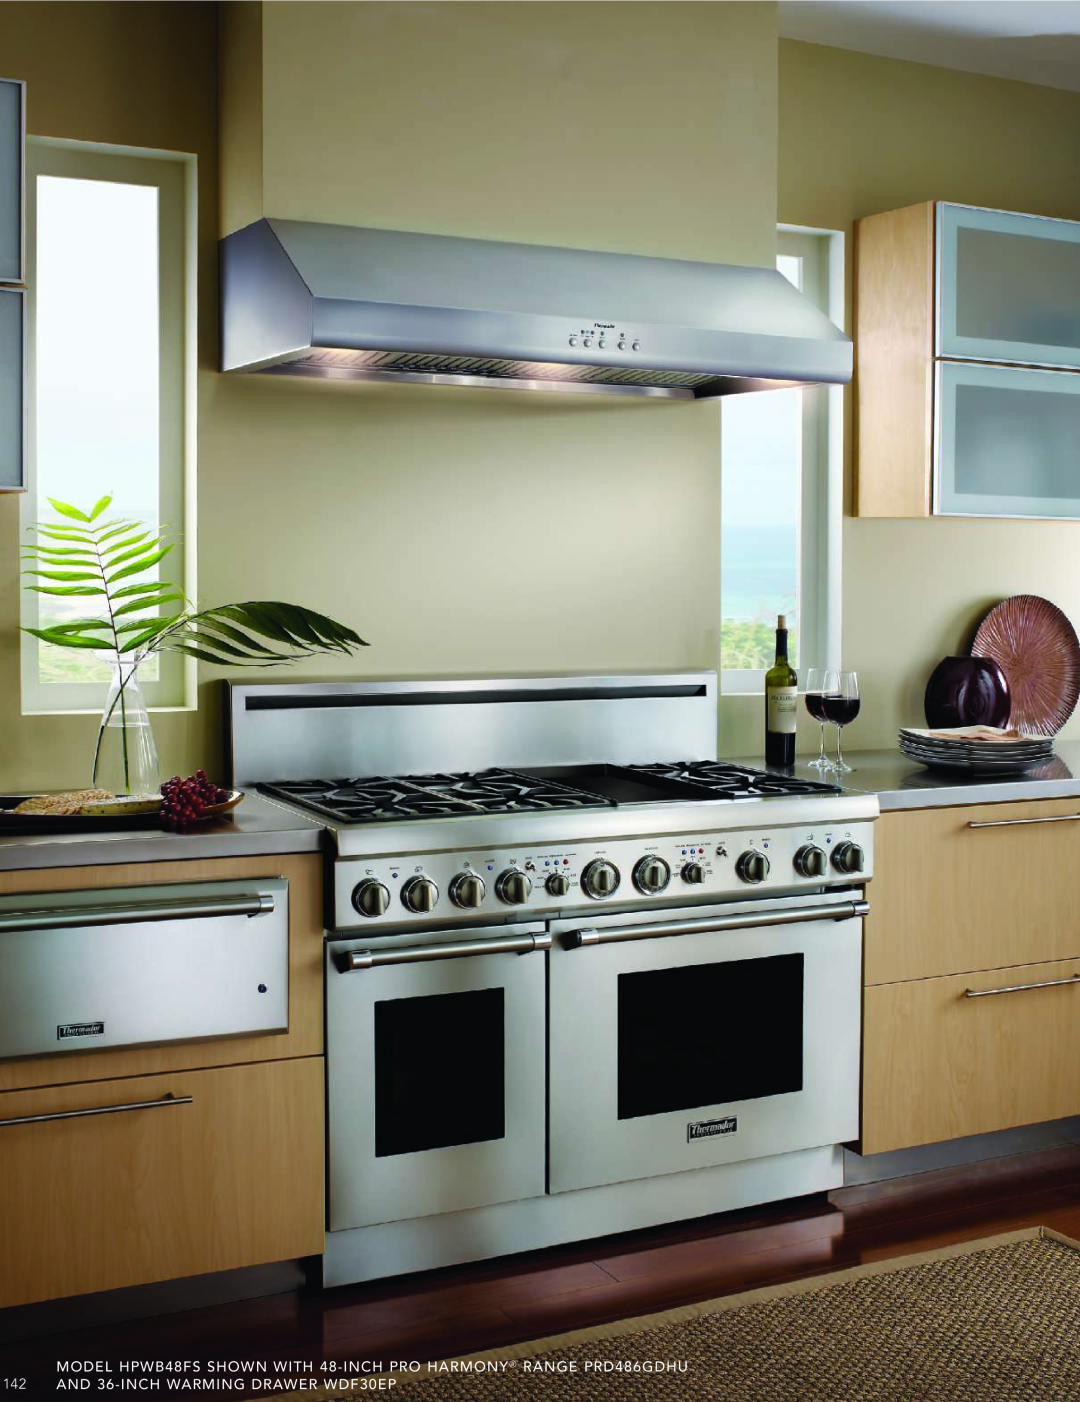 Thermador HMWB36FS MODEL HPWB48FS SHOWN WITH 48-INCH PRO HARMONY RANGE PRD486GDHU, AND 36-INCH WARMING DRAWER WDF30EP 